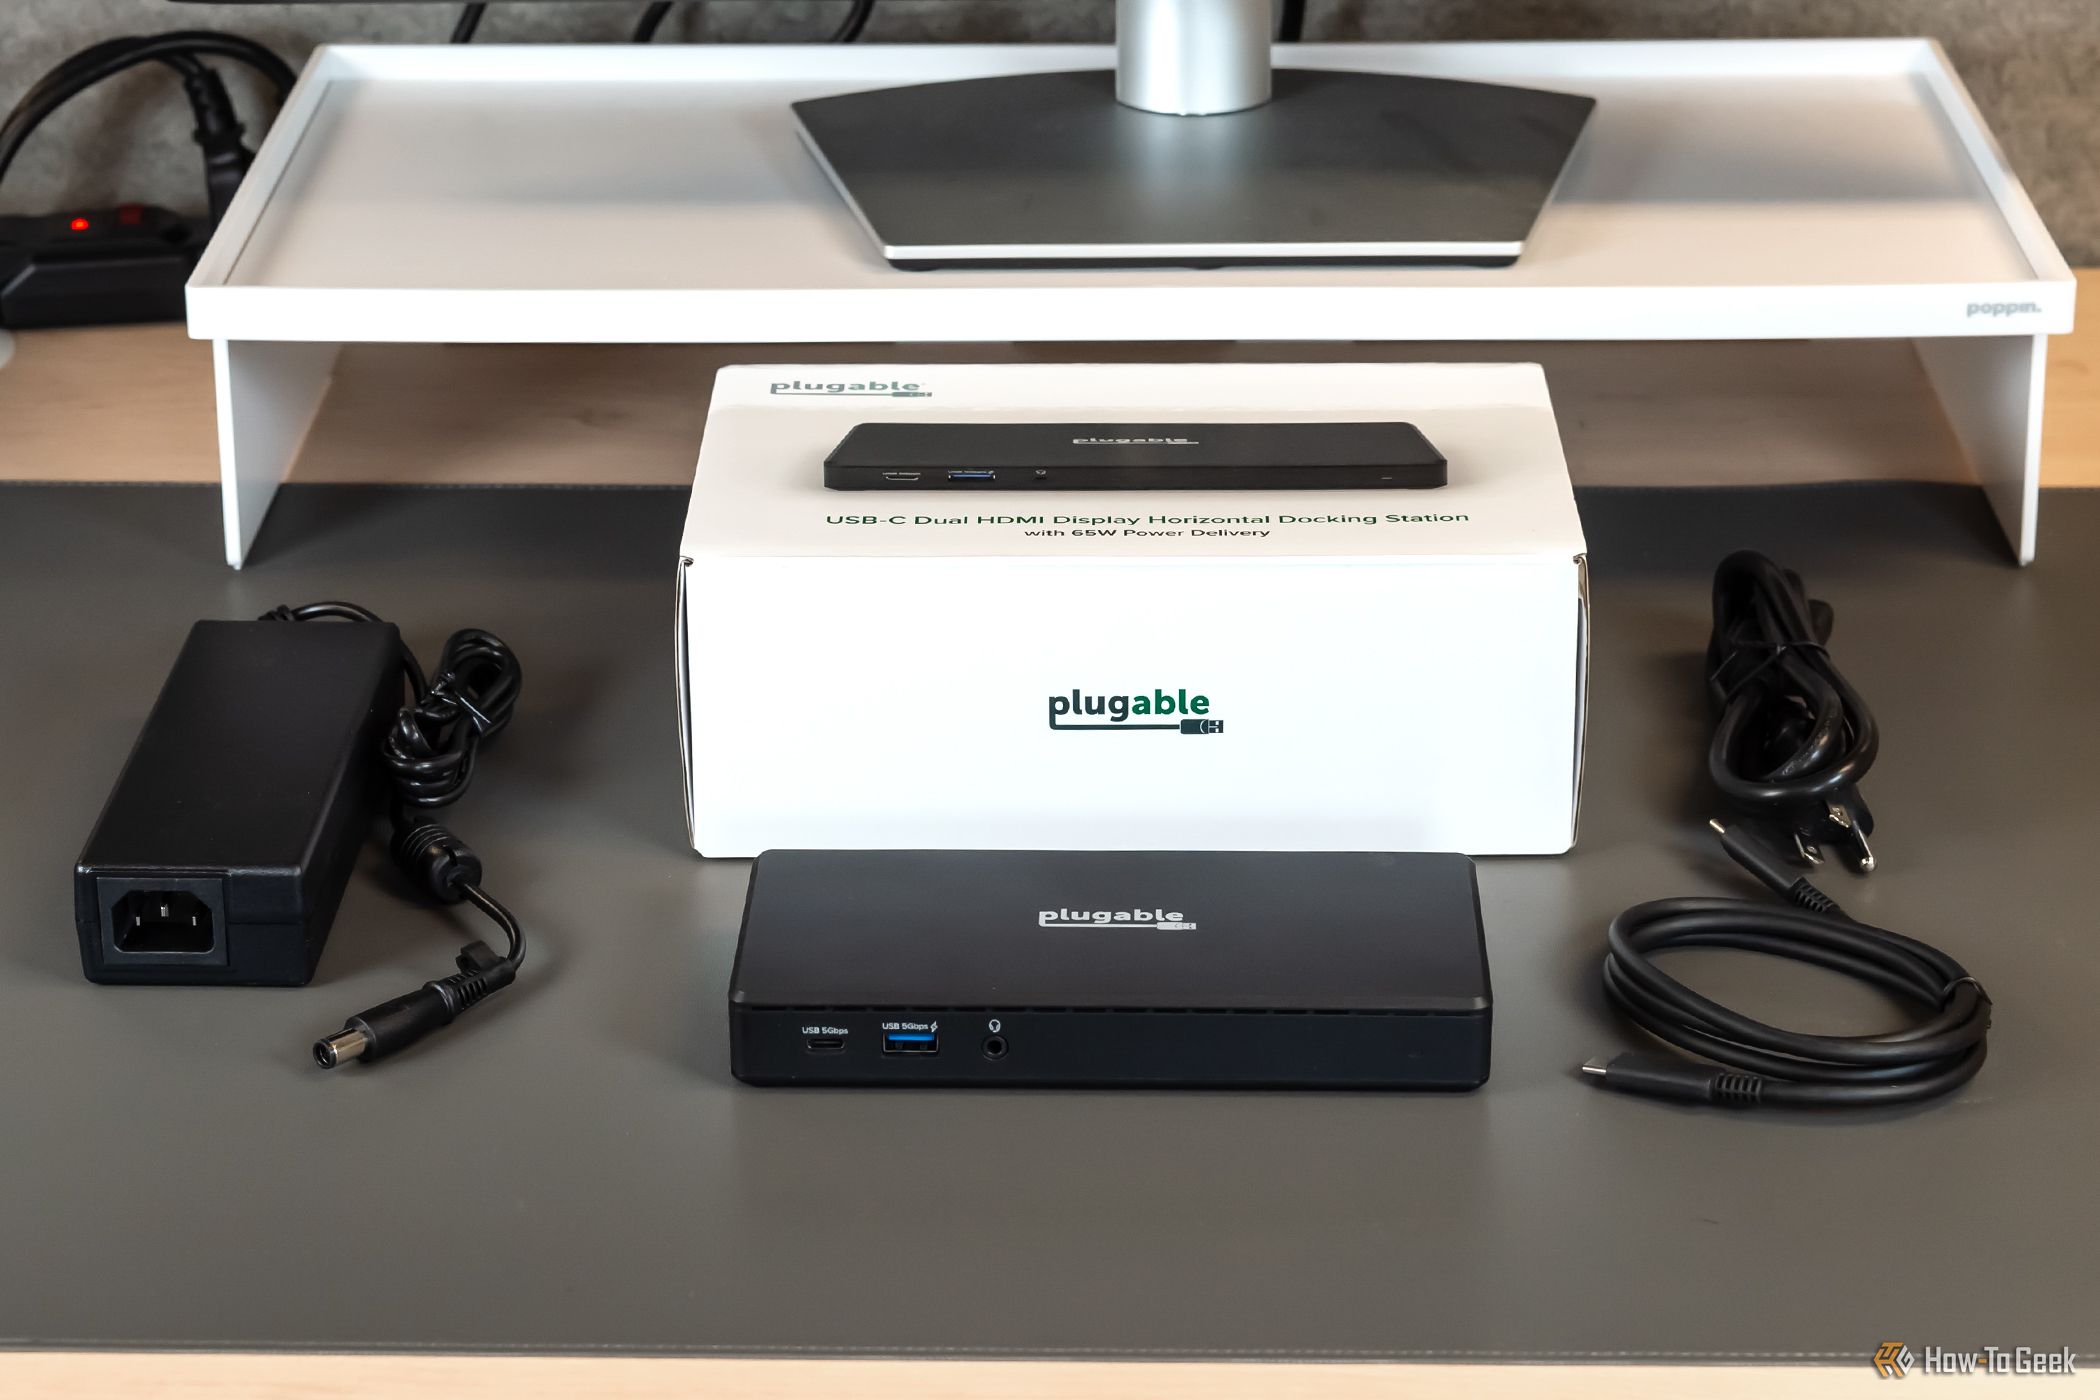 The Plugable USB C Dual HDMI Docking Station with the provided cables and its box